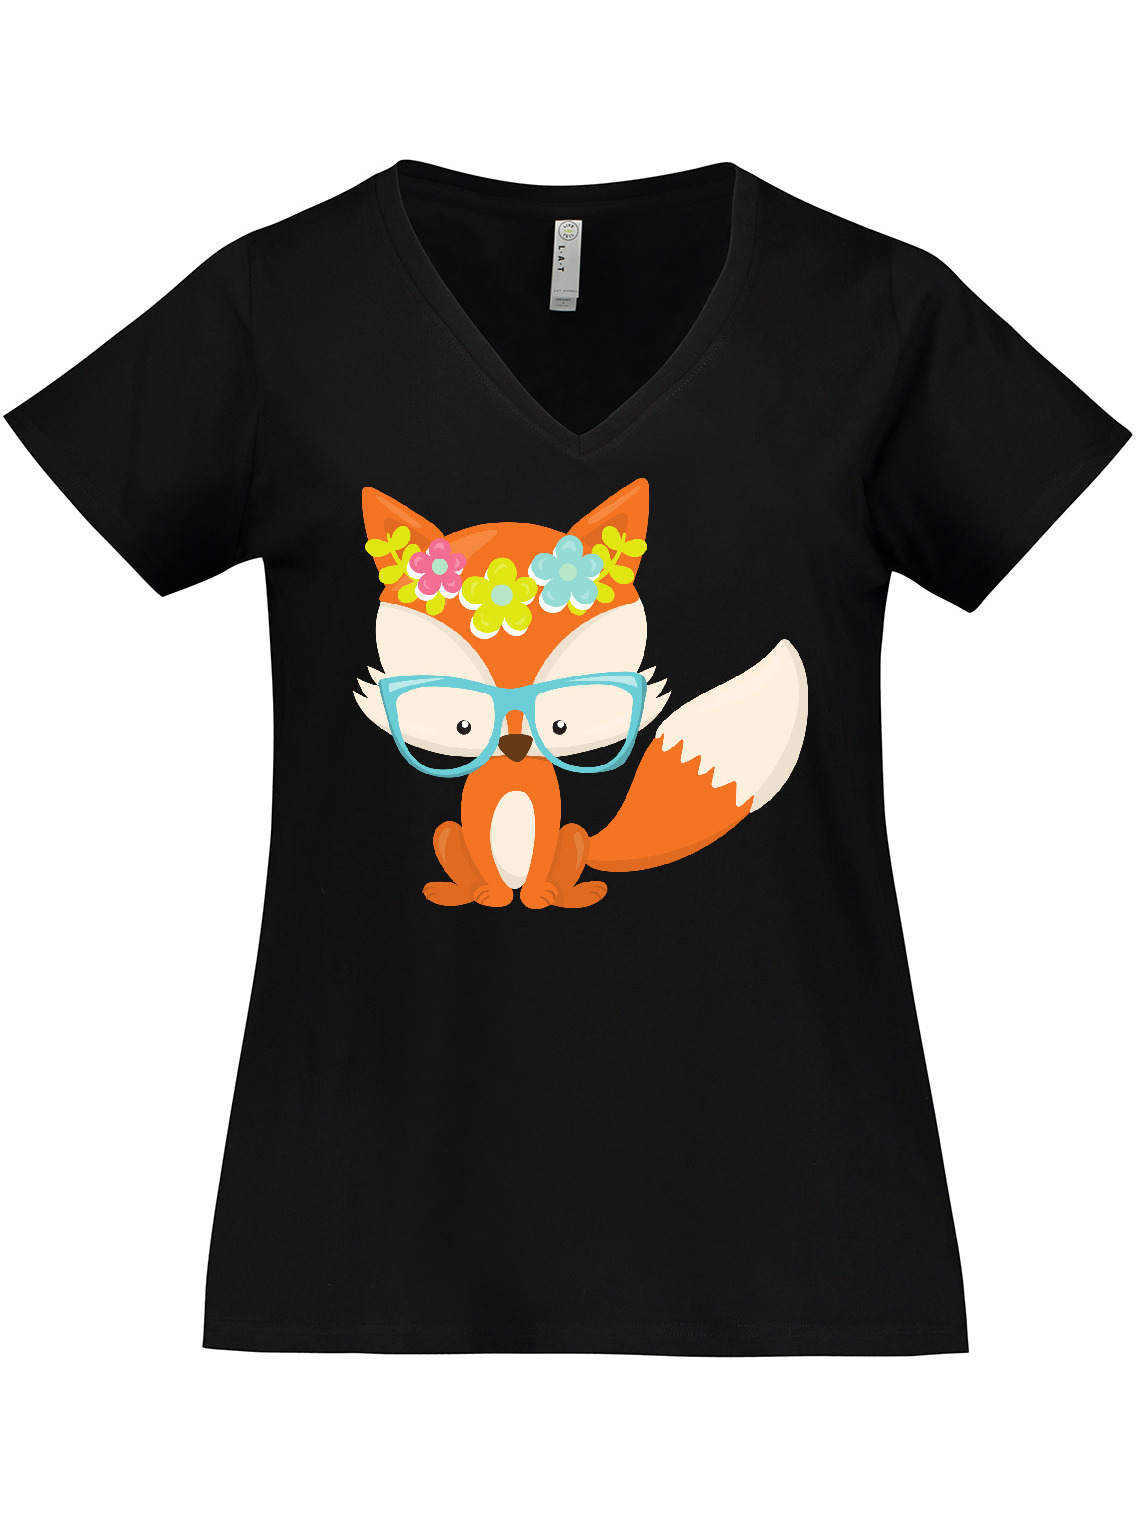 Inktastic Hipster Fox, Fox with Glasses, Colorful Flowers Women's Plus Size V-Neck T-Shirt - image 1 of 4